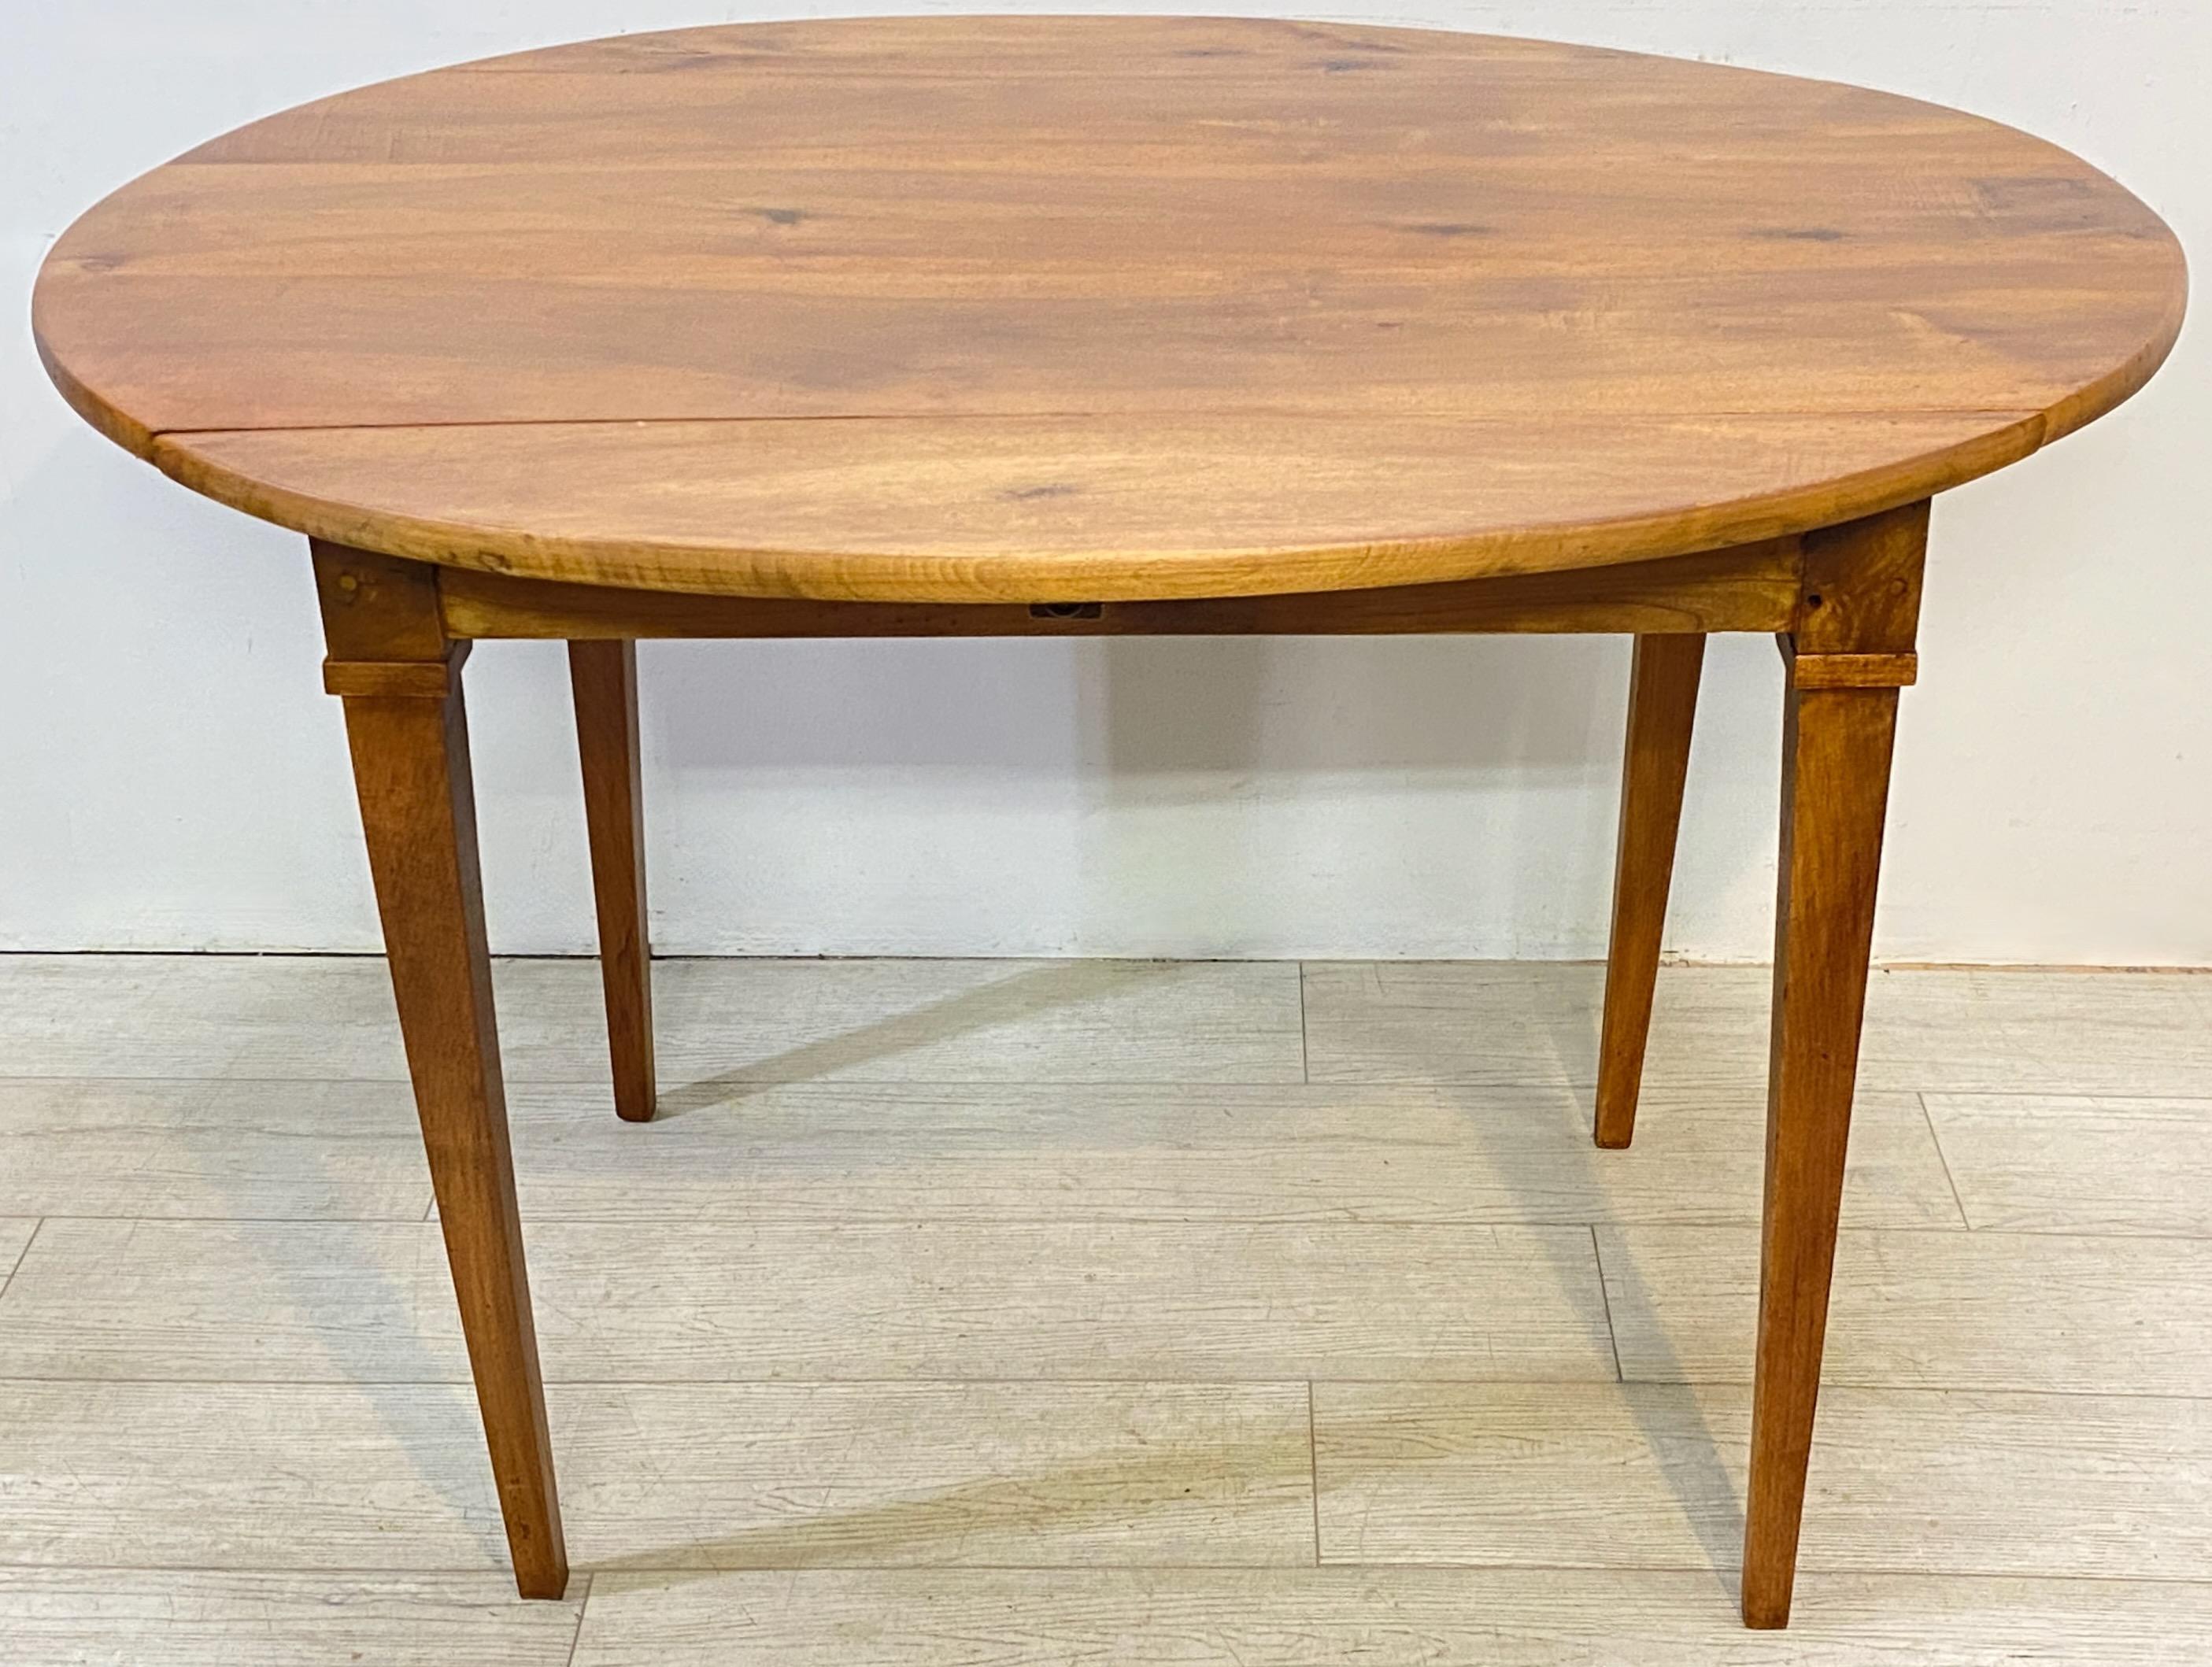 Early 19th C French Cherry Wood Elliptical Drop Leaf Dining Table, circa 1800 For Sale 1